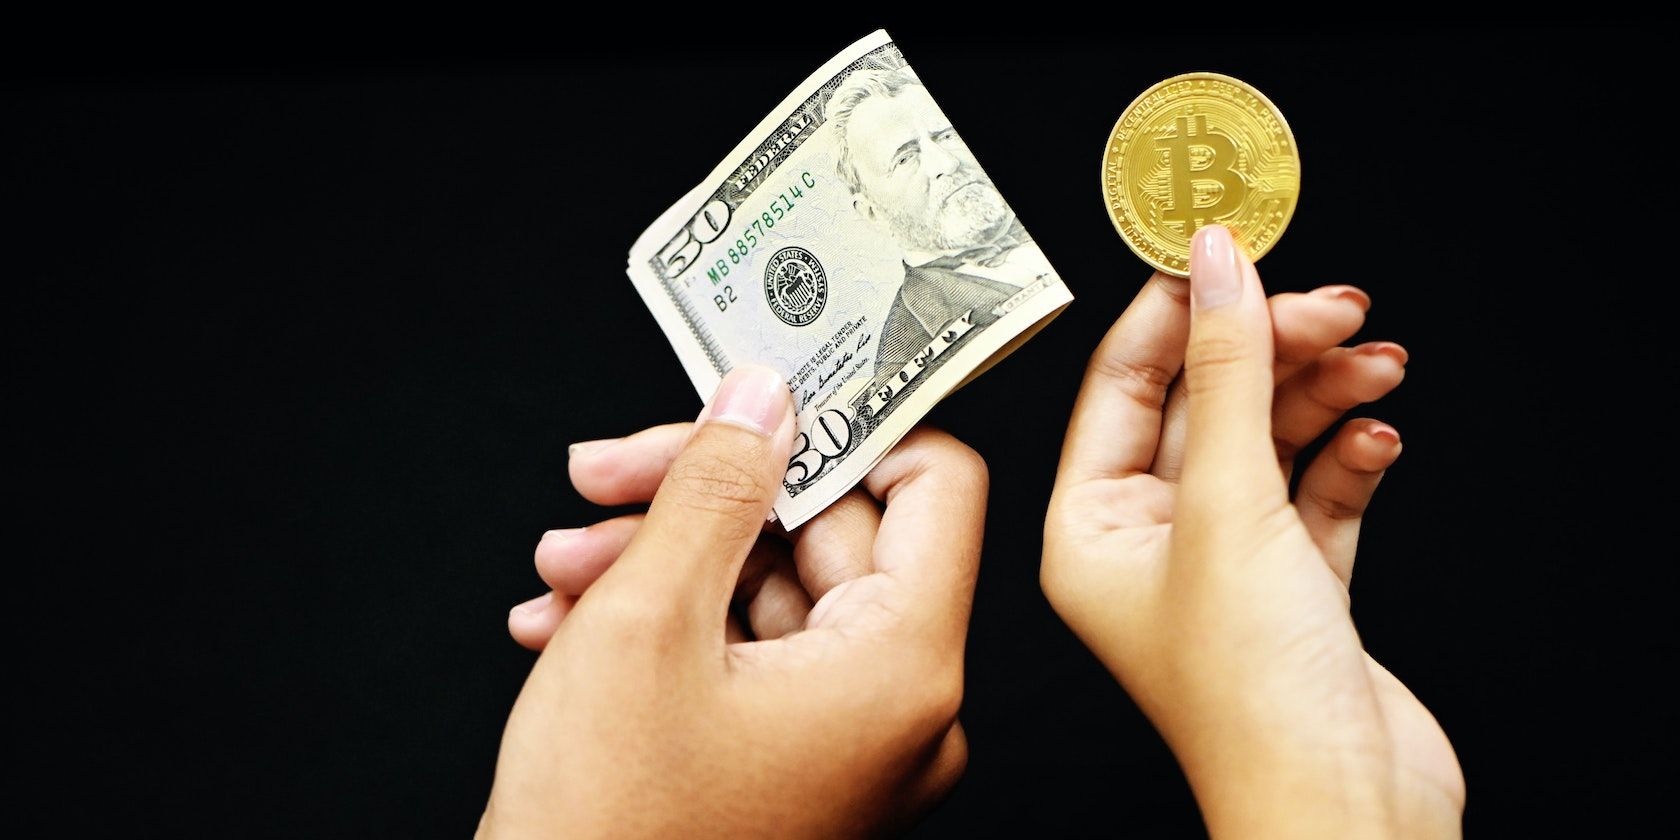 Hand holding $50 bill, with another hand holding a Bitcoin